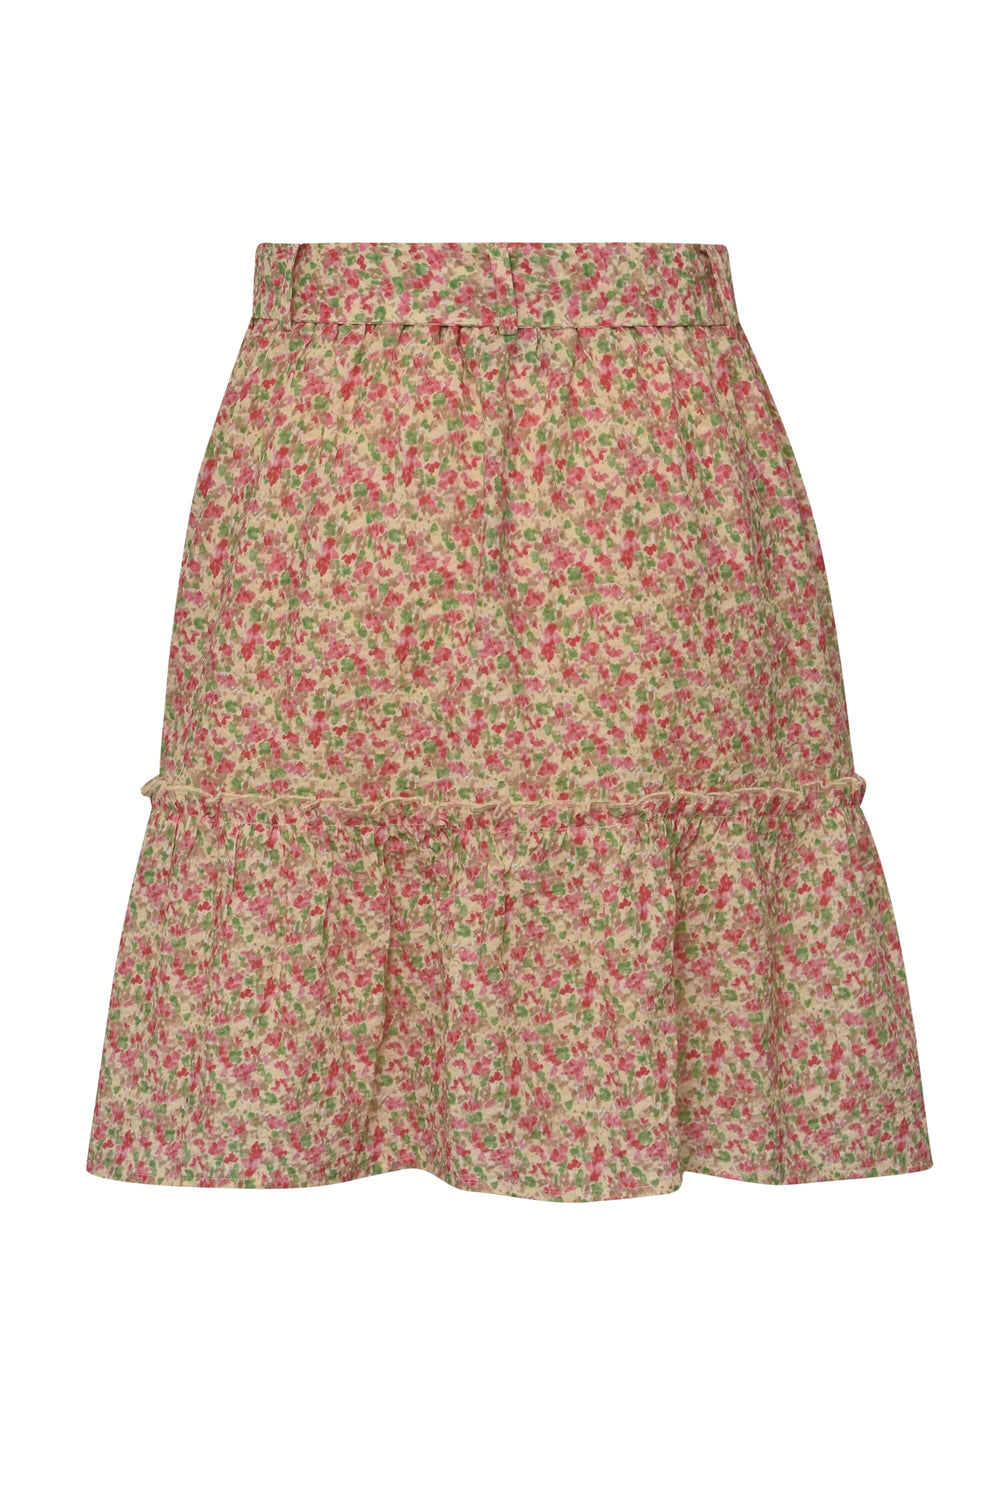 A-View - Kate Skirt - 255 Rose/Red Nederdele 